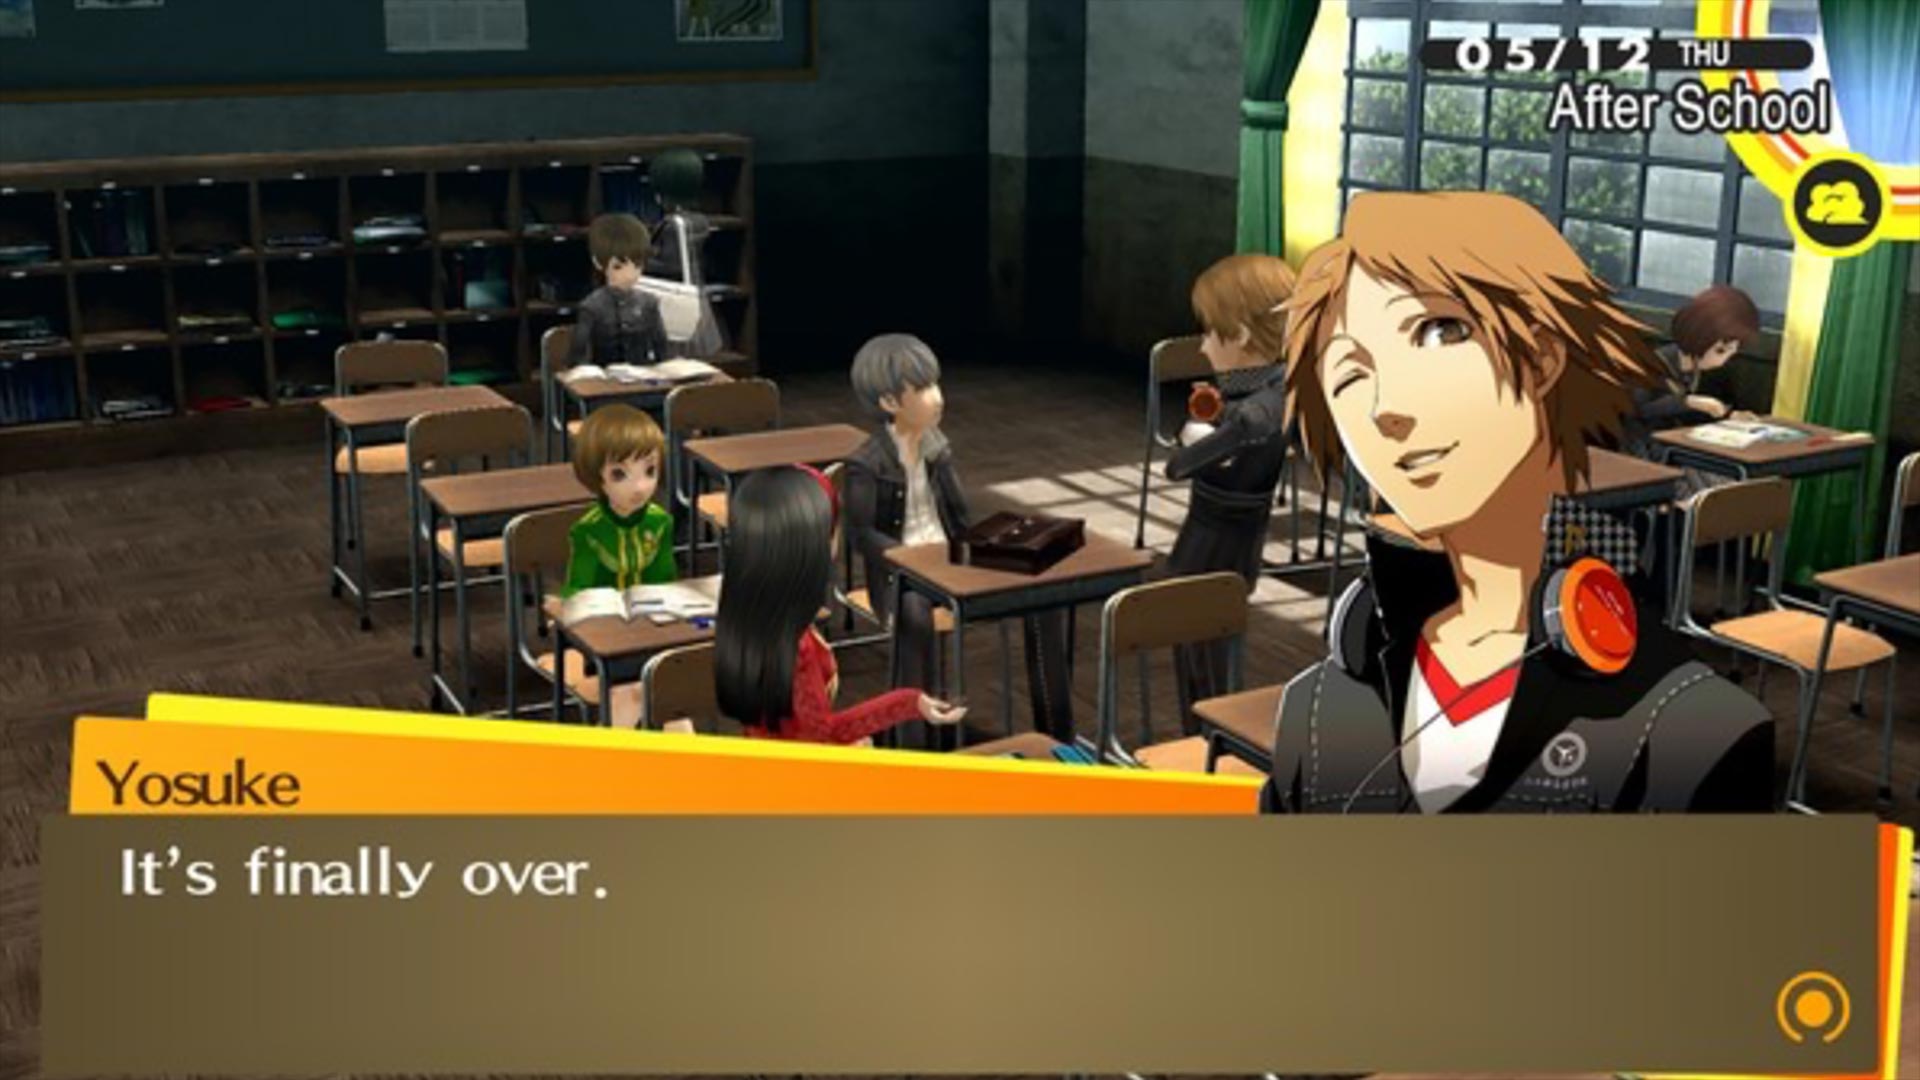 Yosuke says "it's finally over" in Persona 4 Gold.